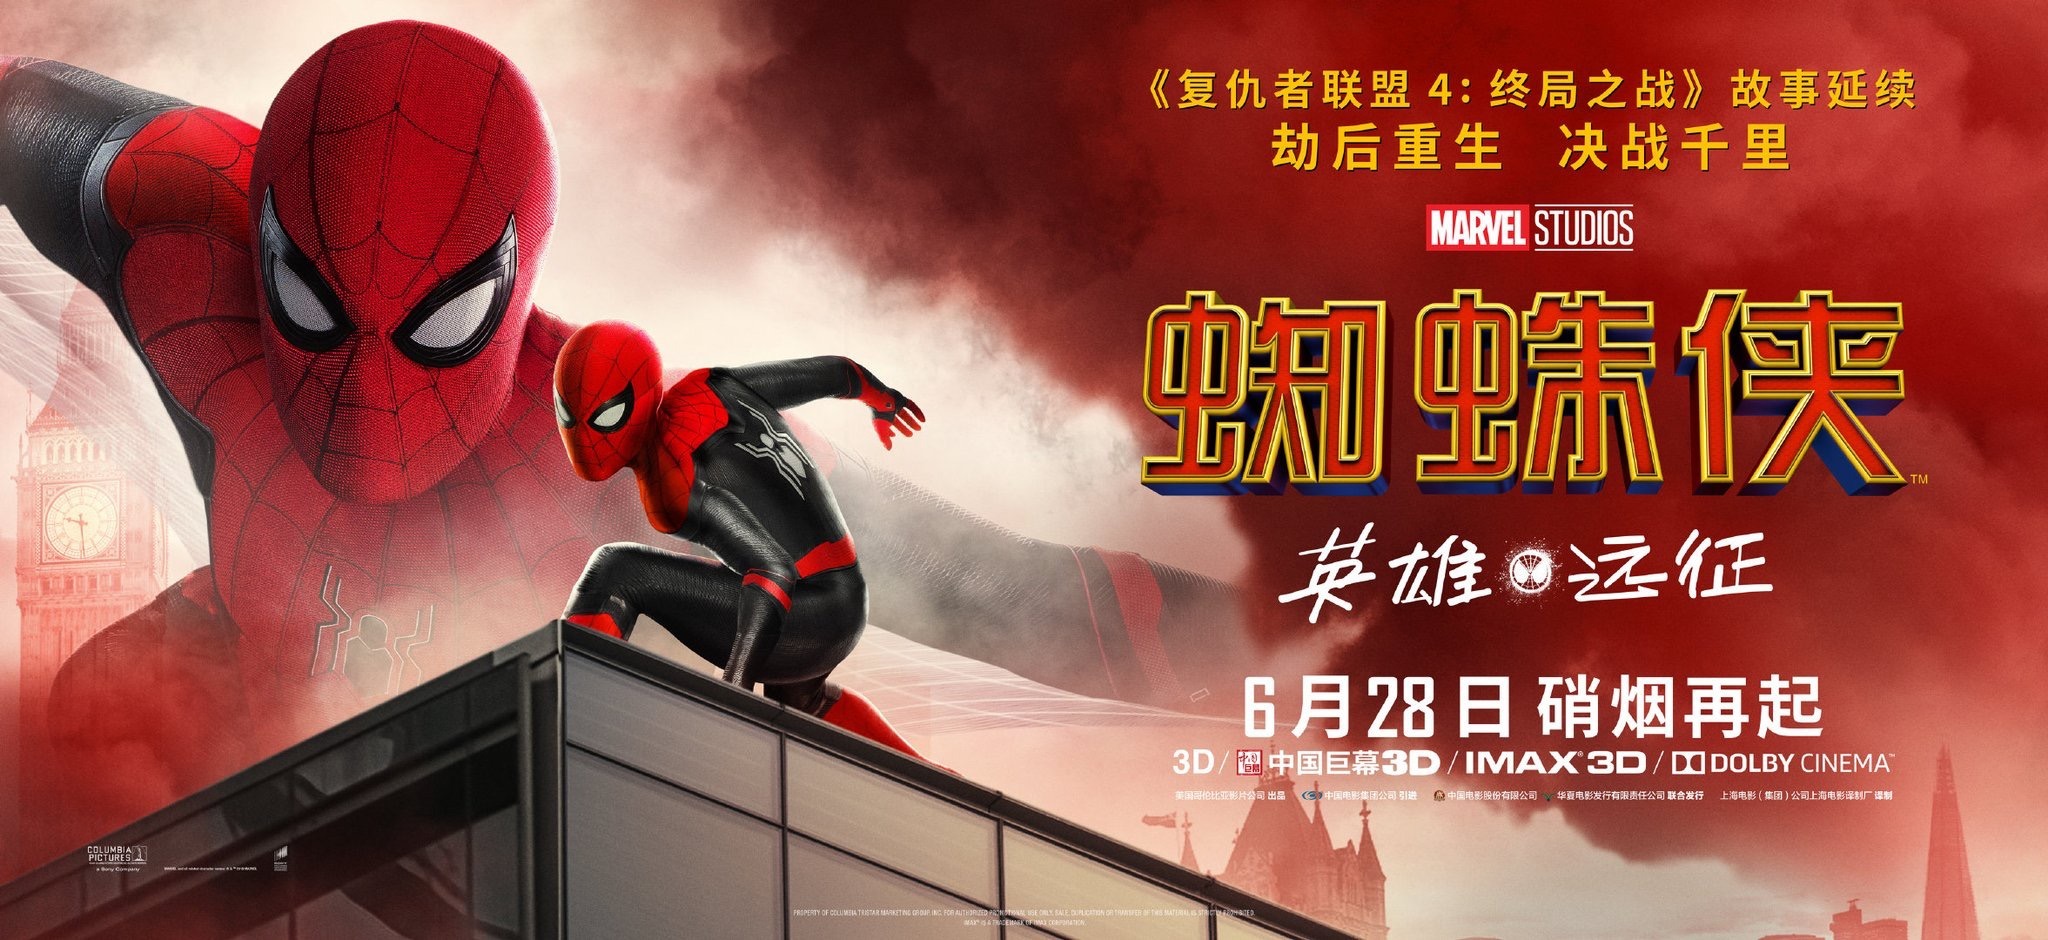 Mega Sized Movie Poster Image for Spider-Man: Far From Home (#17 of 35)